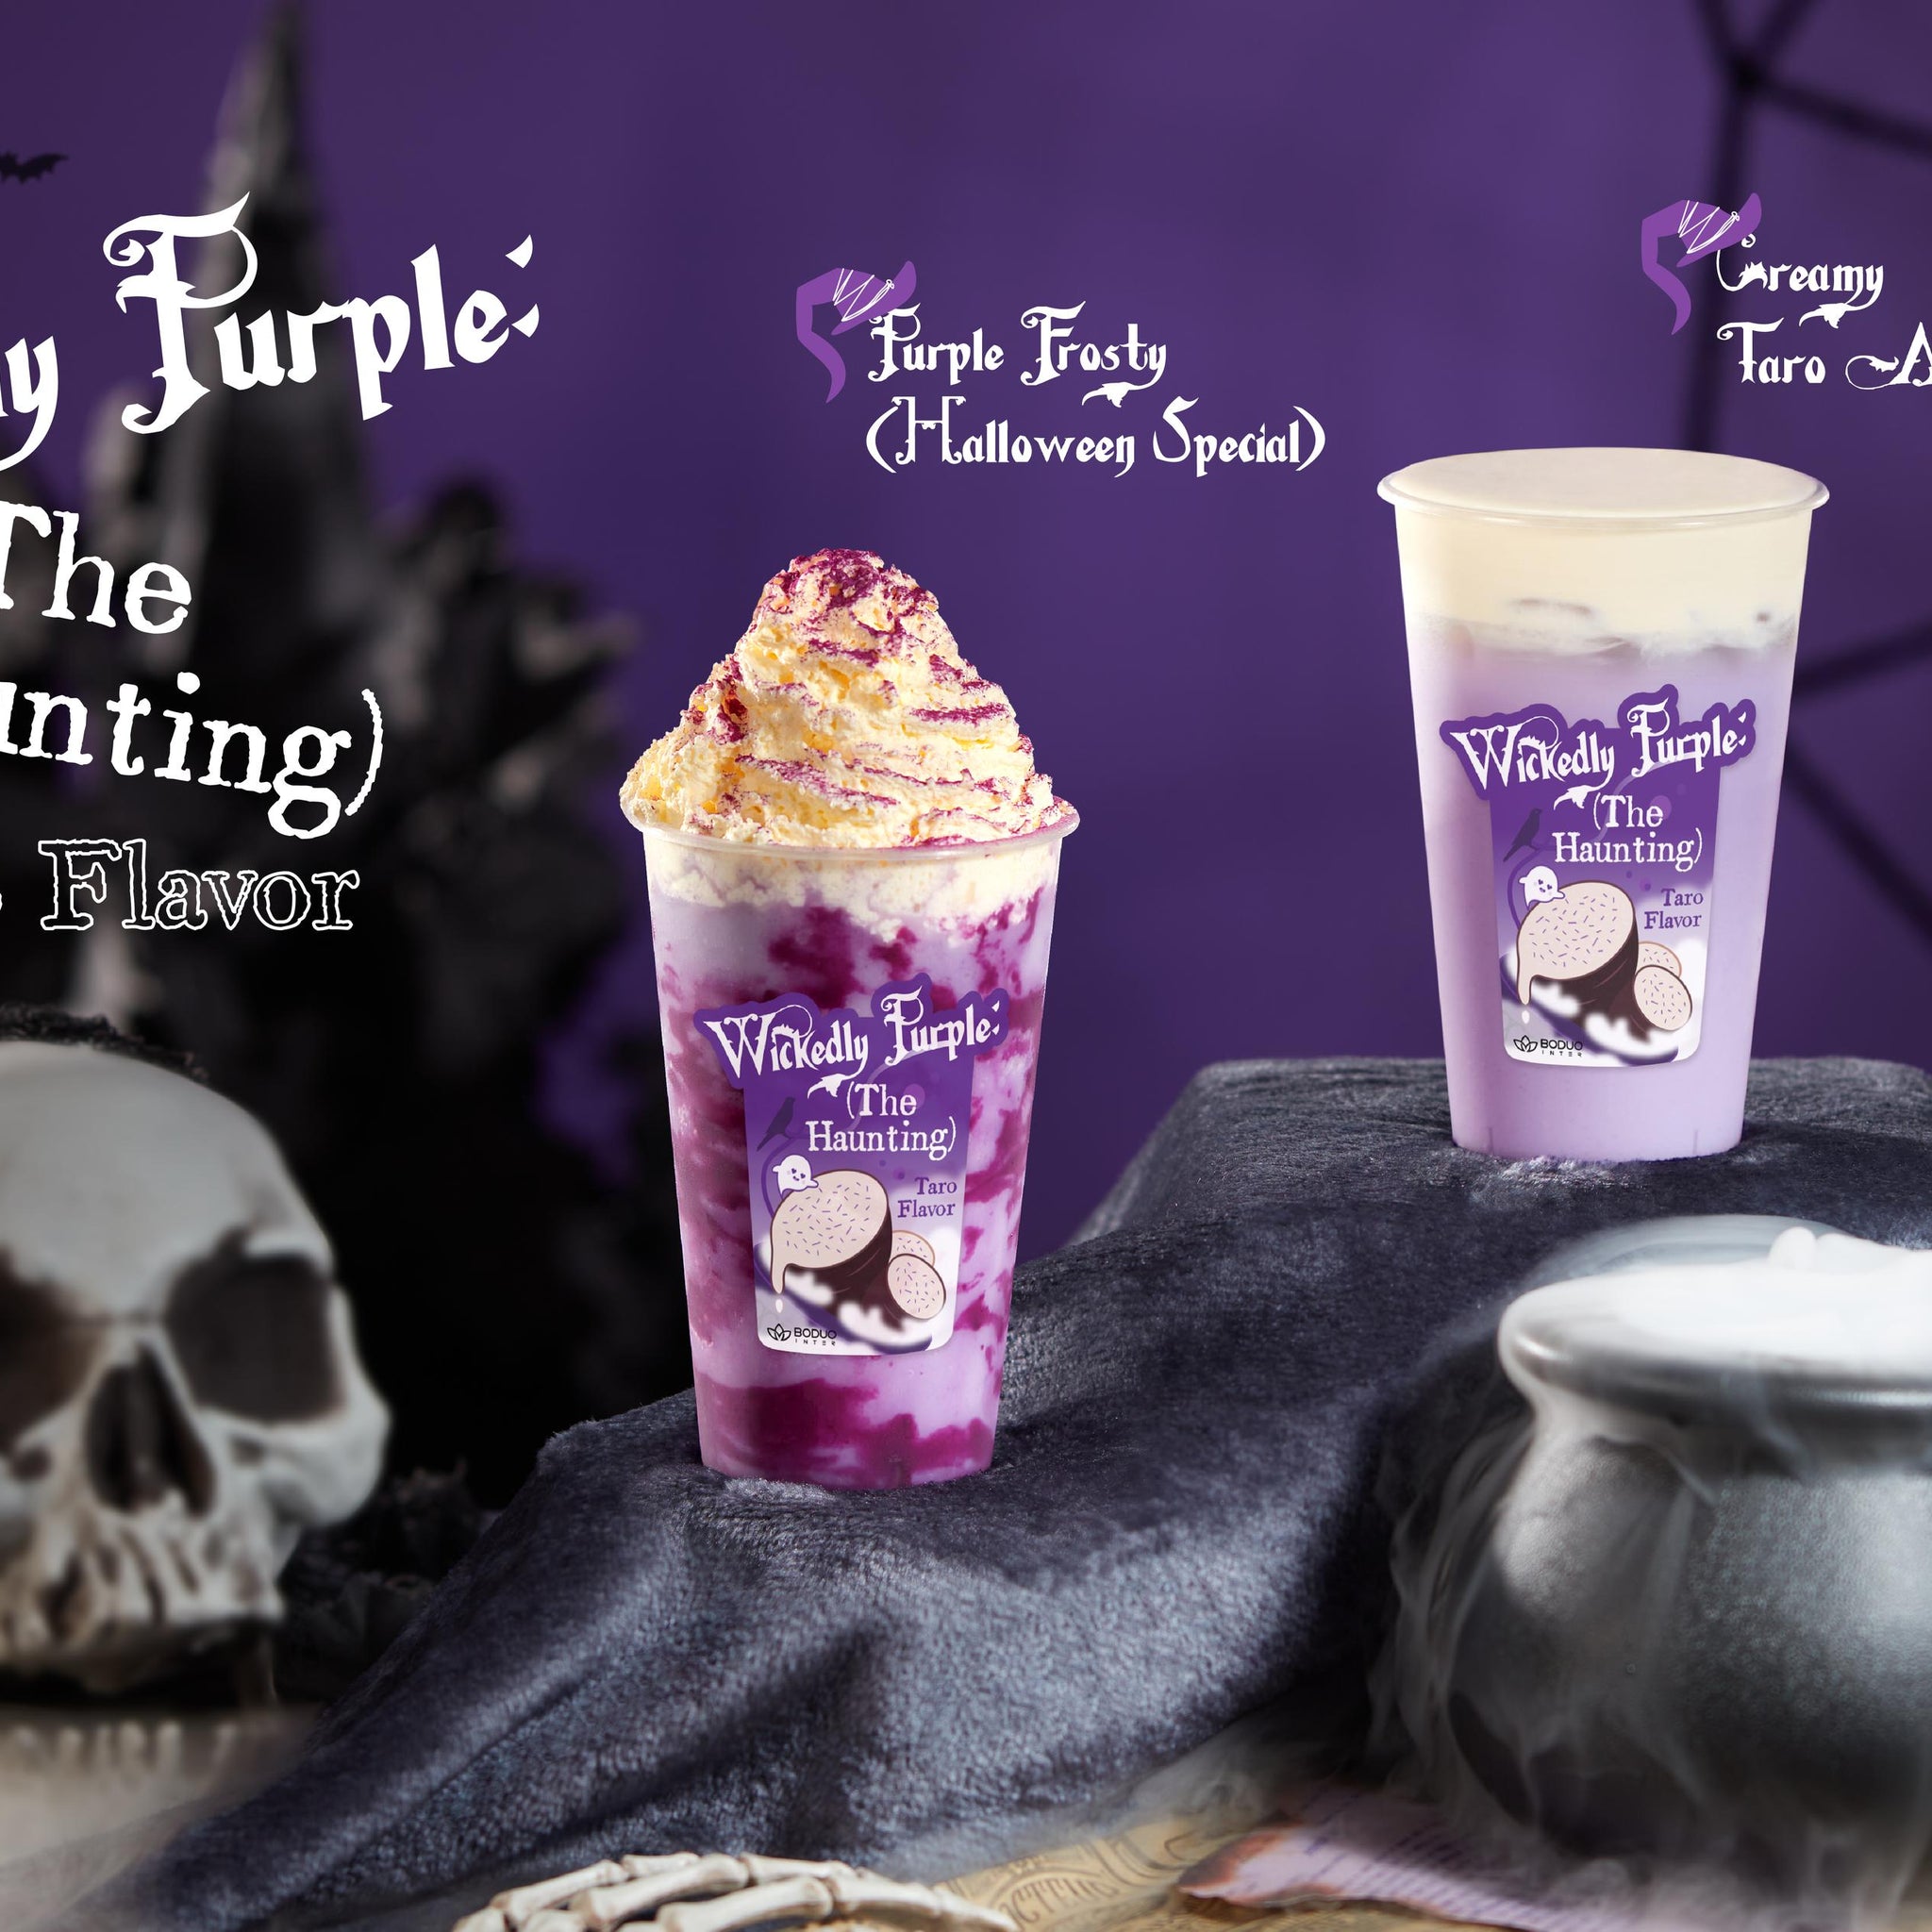 Wickedly Purple: The Haunting Taro Flavour